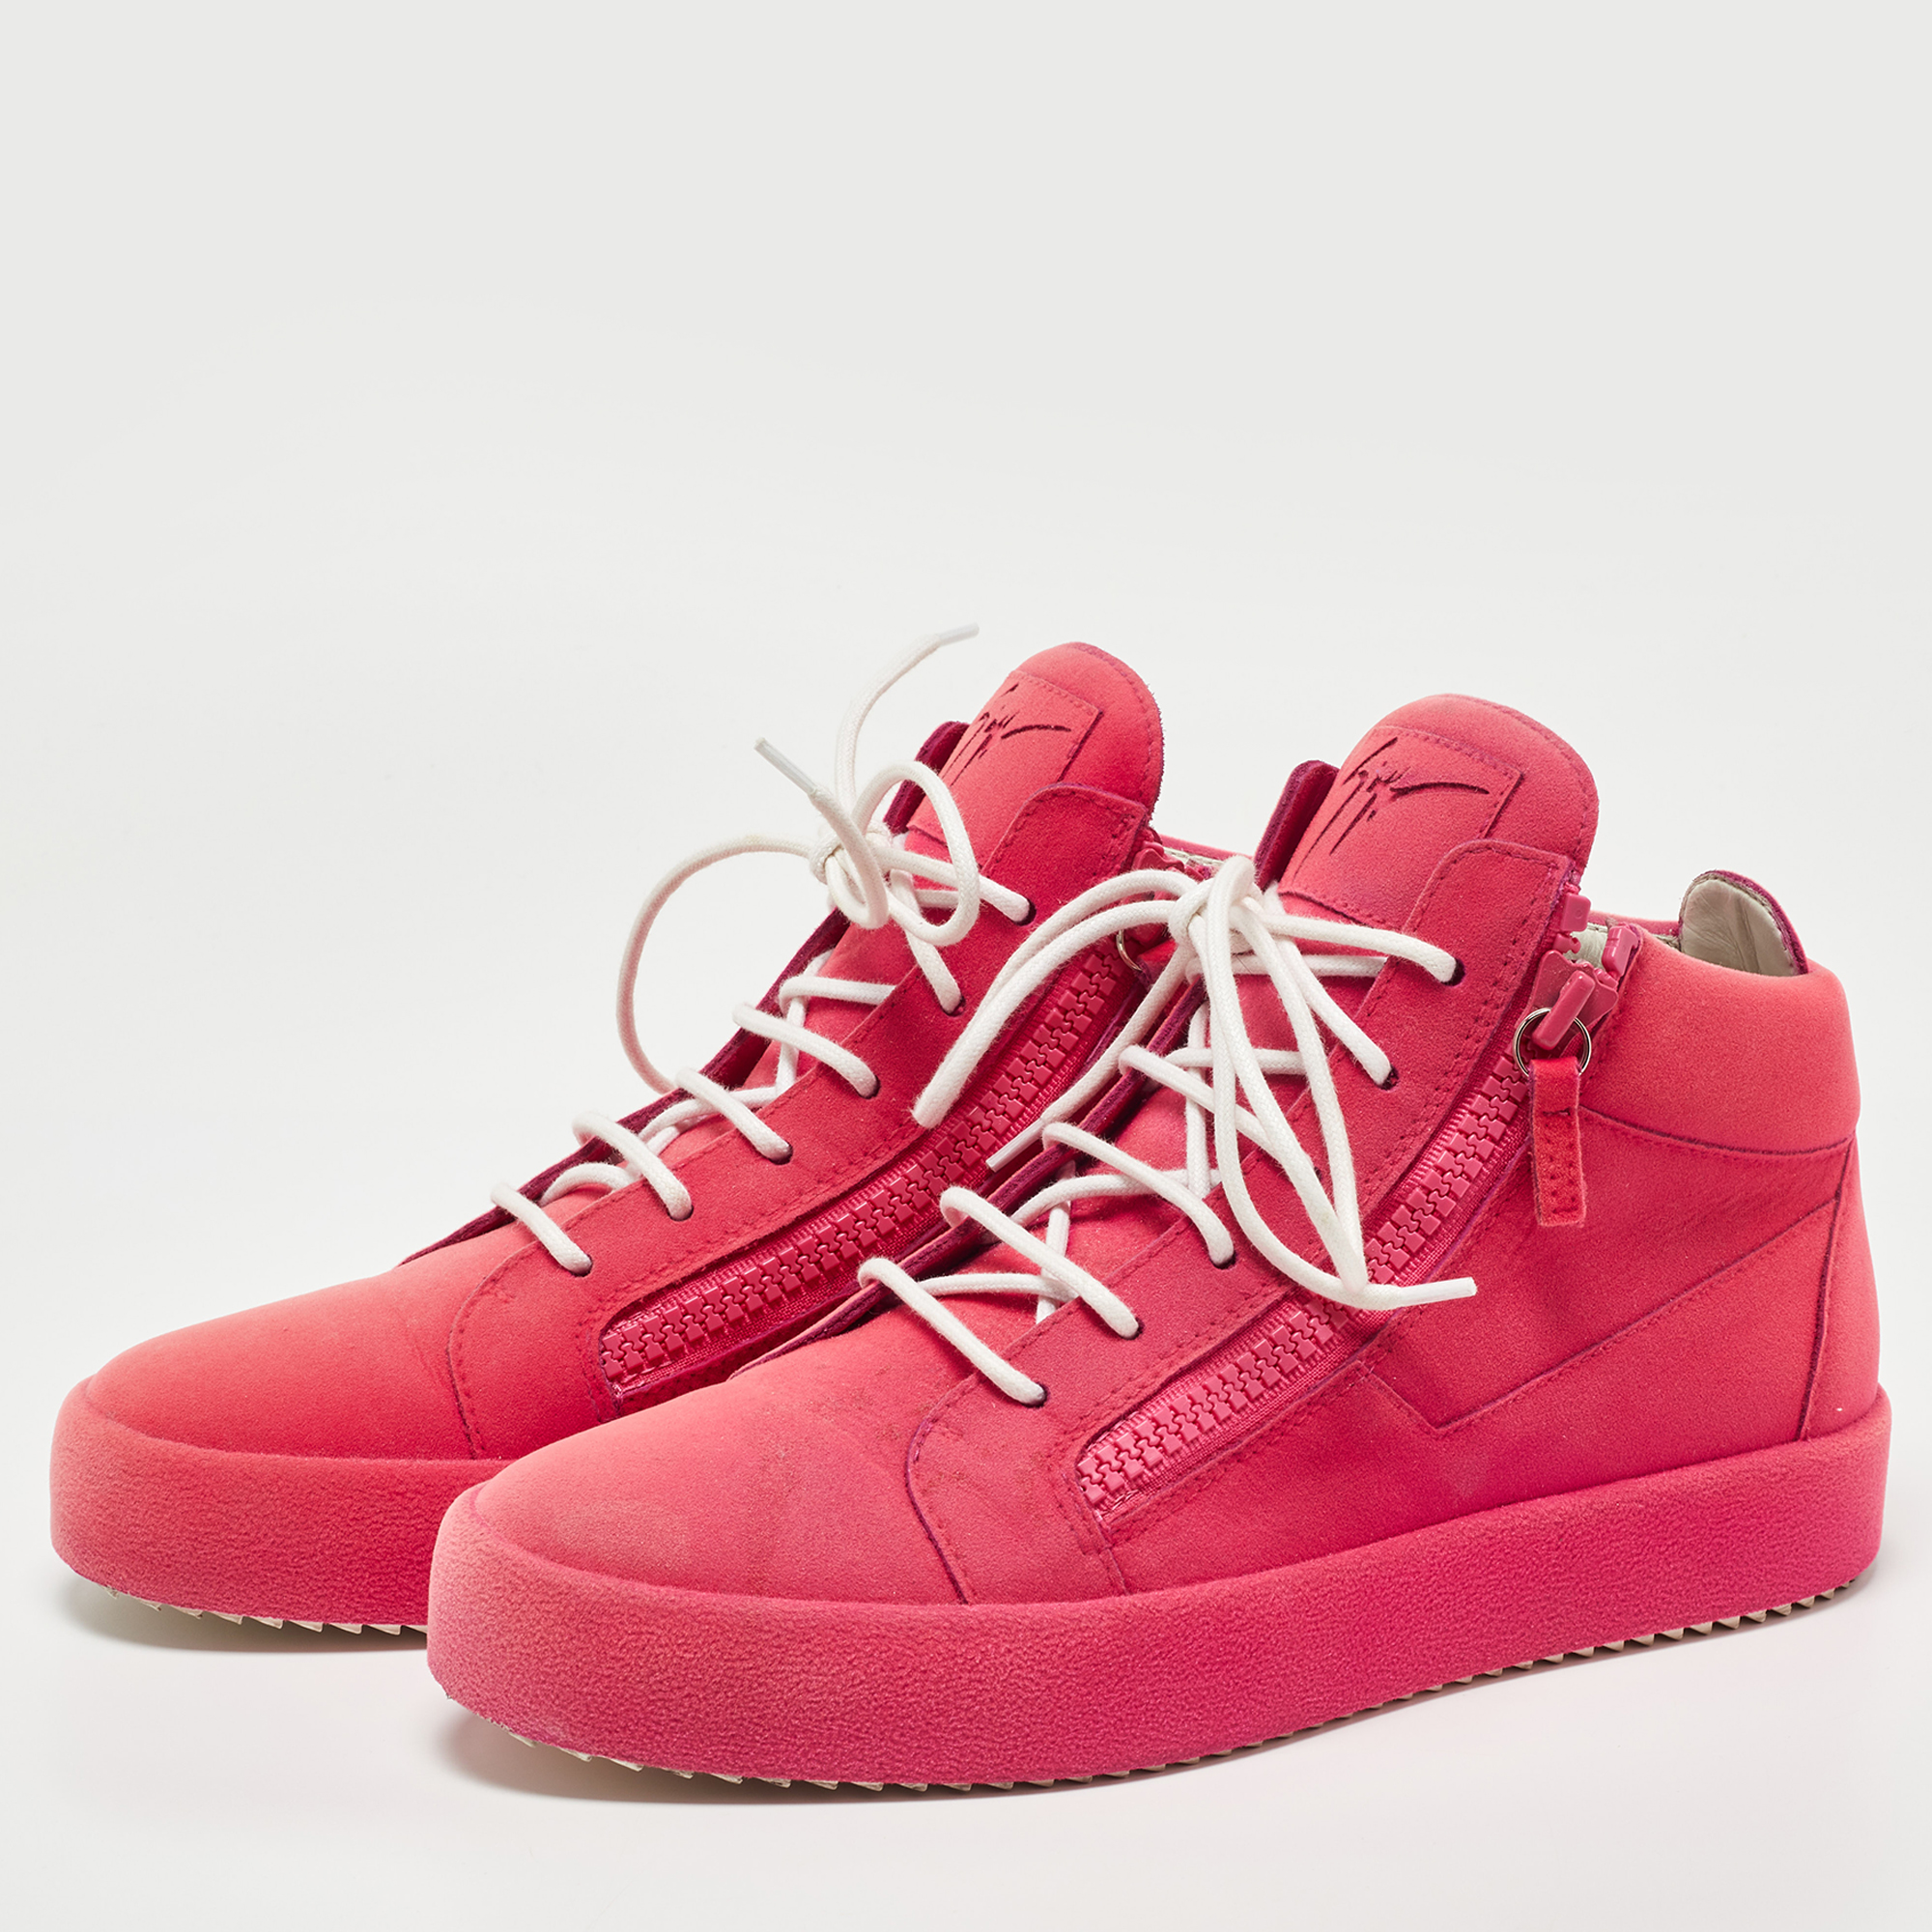 

Giuseppe Zanotti Two Tone Suede Kriss High Top Sneakers Size, Pink